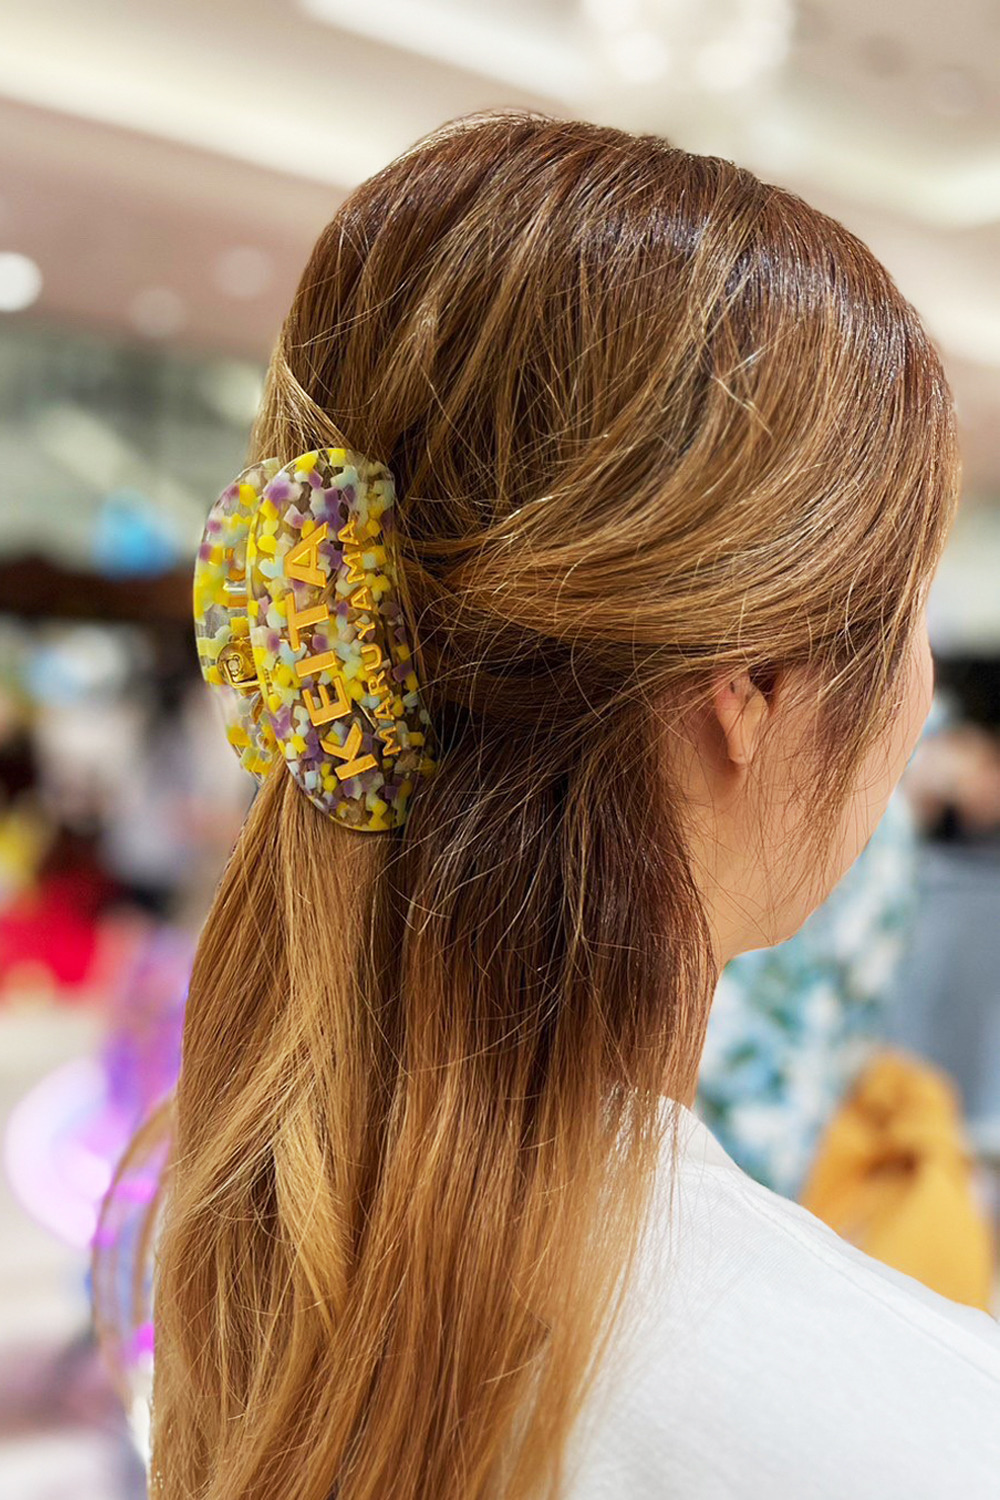 PICKY THE SHOP Collaborate ヘアクリップ（Yellow） 詳細画像 イエロー 3